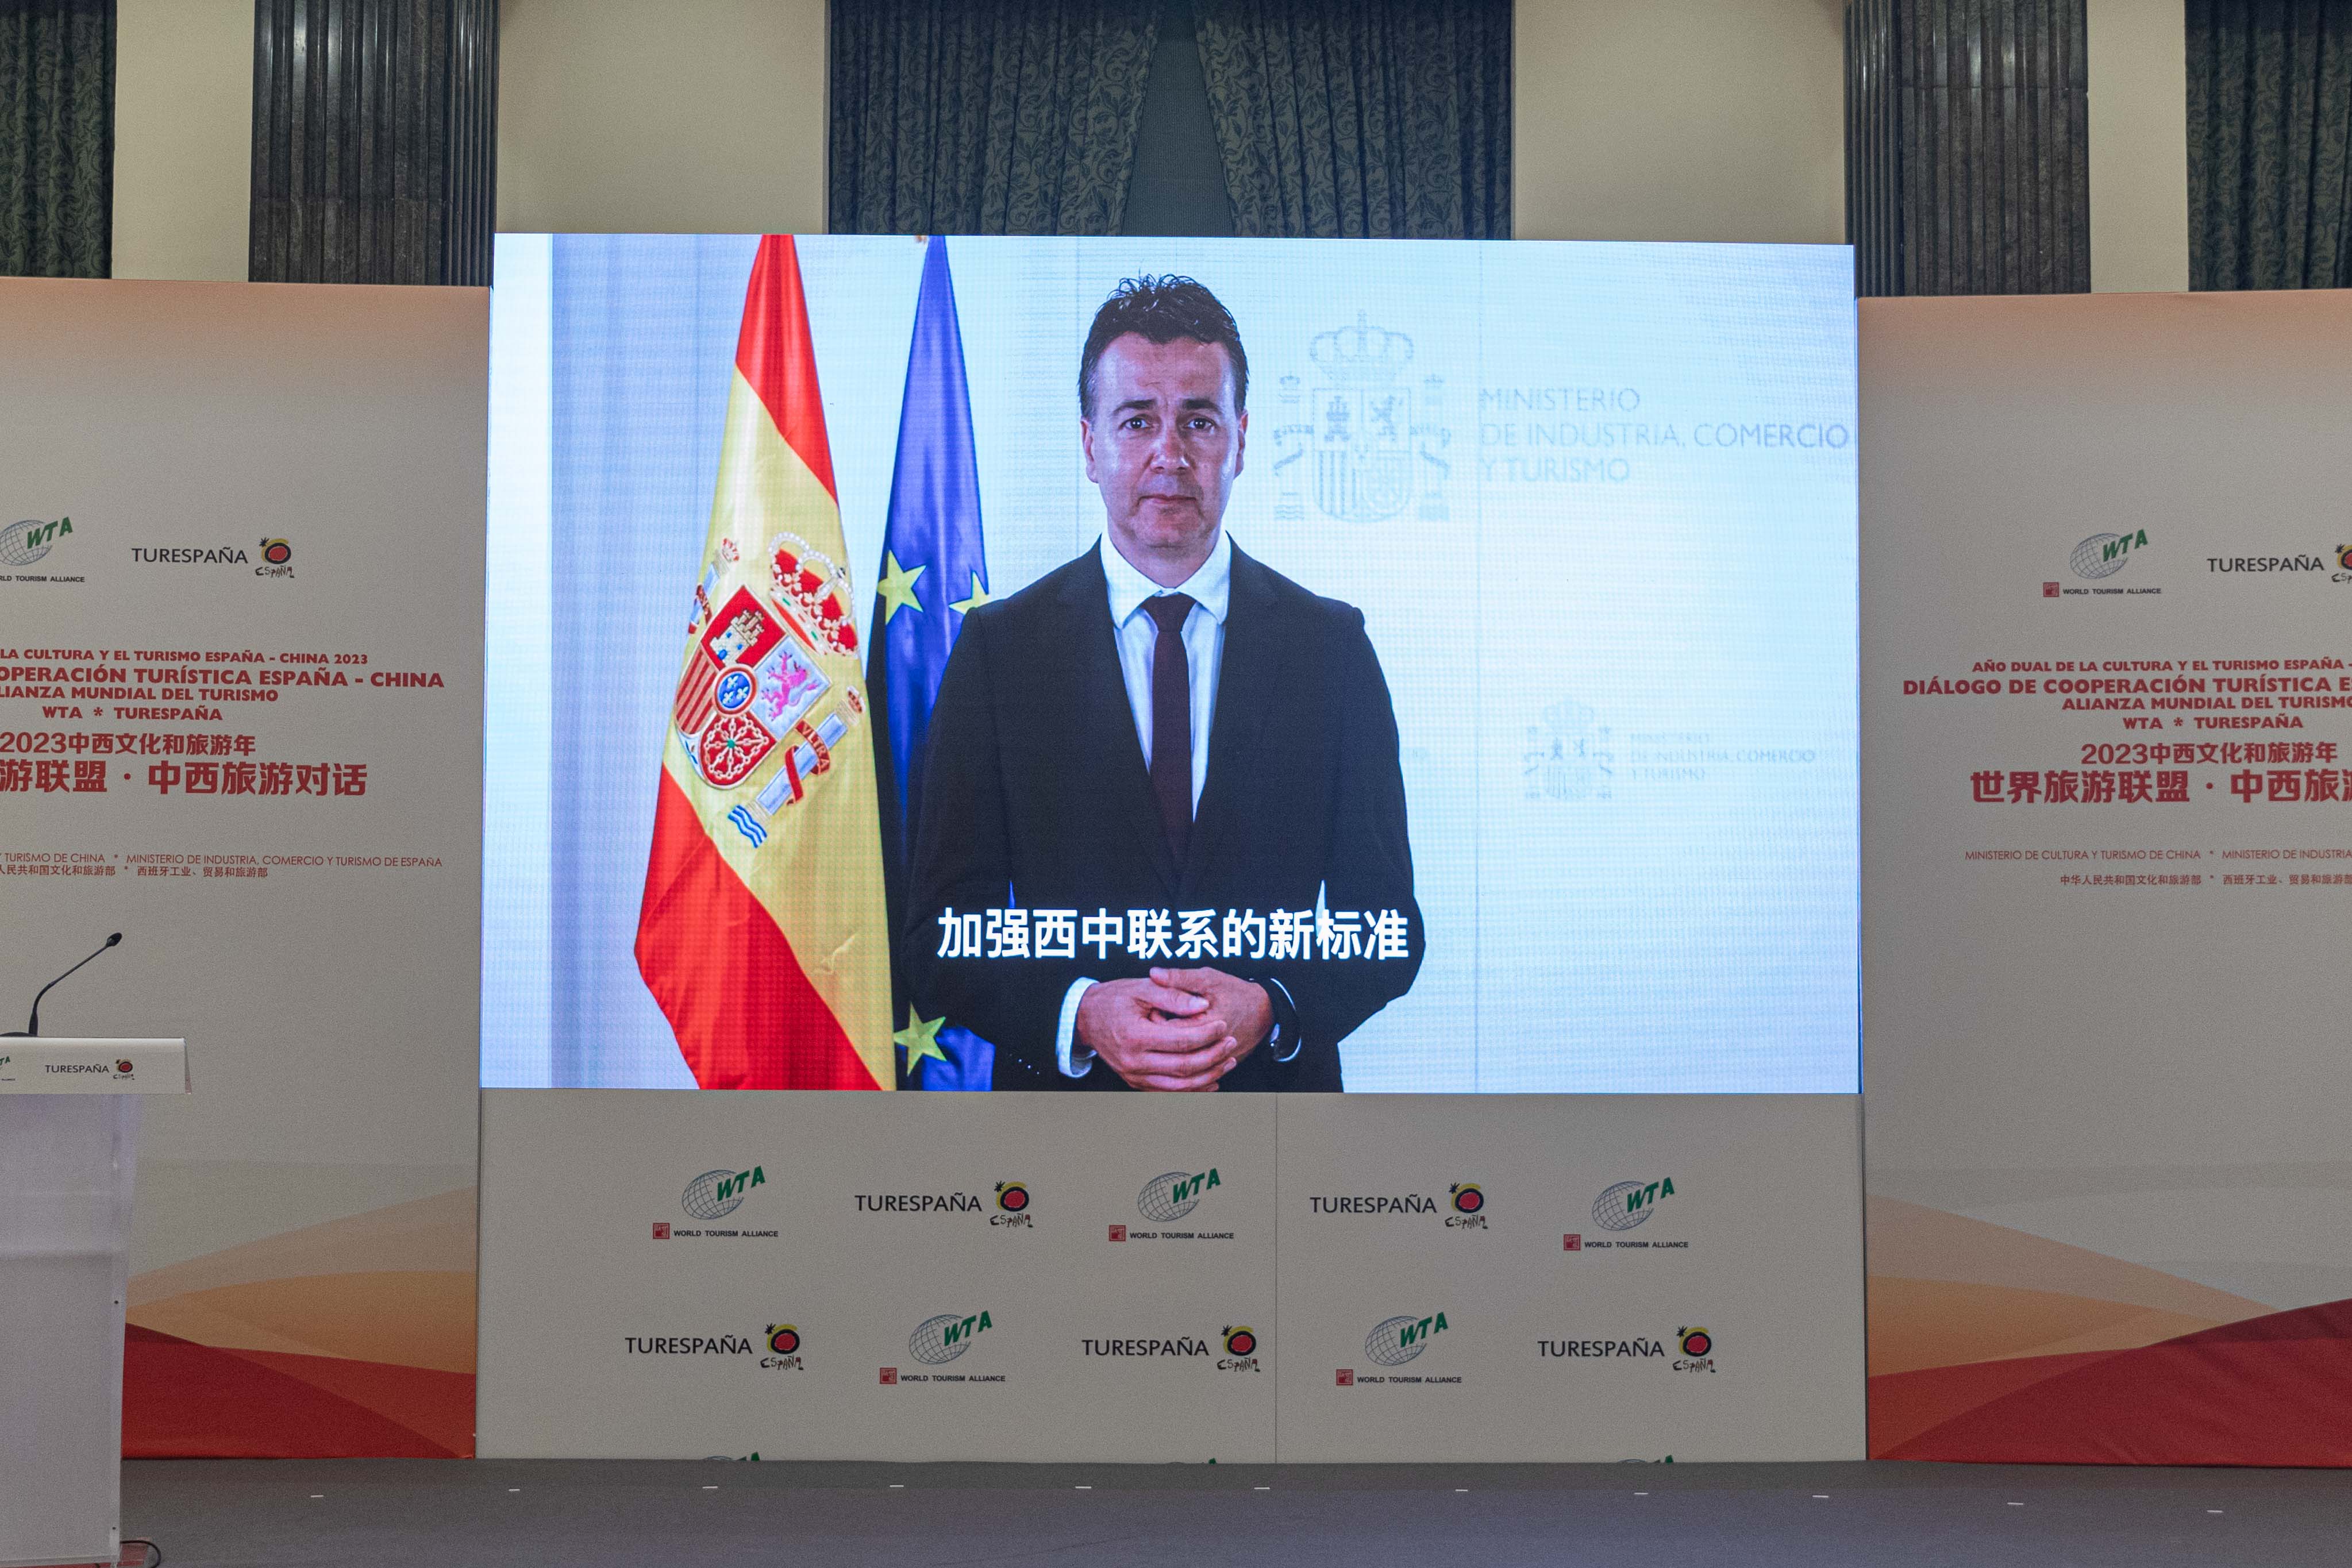 Héctor Gómez, Minister of Industry, Commerce and Tourism, Spain